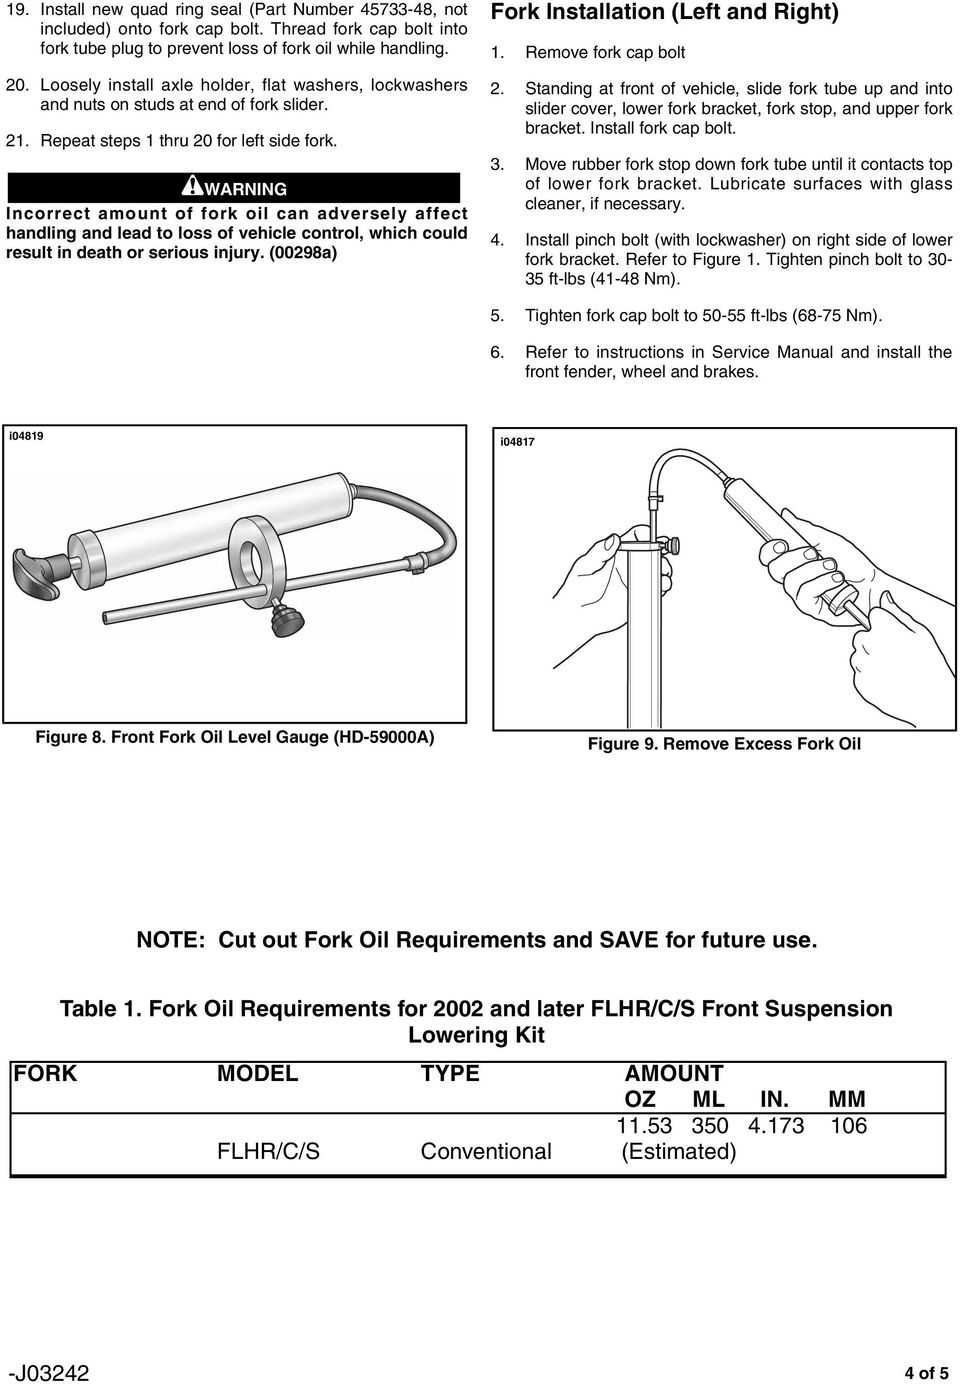 Incorrect amount of fork oil can adversely affect handling and lead to loss of vehicle control, which could result in death or serious injury. (0098a) Fork Installation (Left and Right).